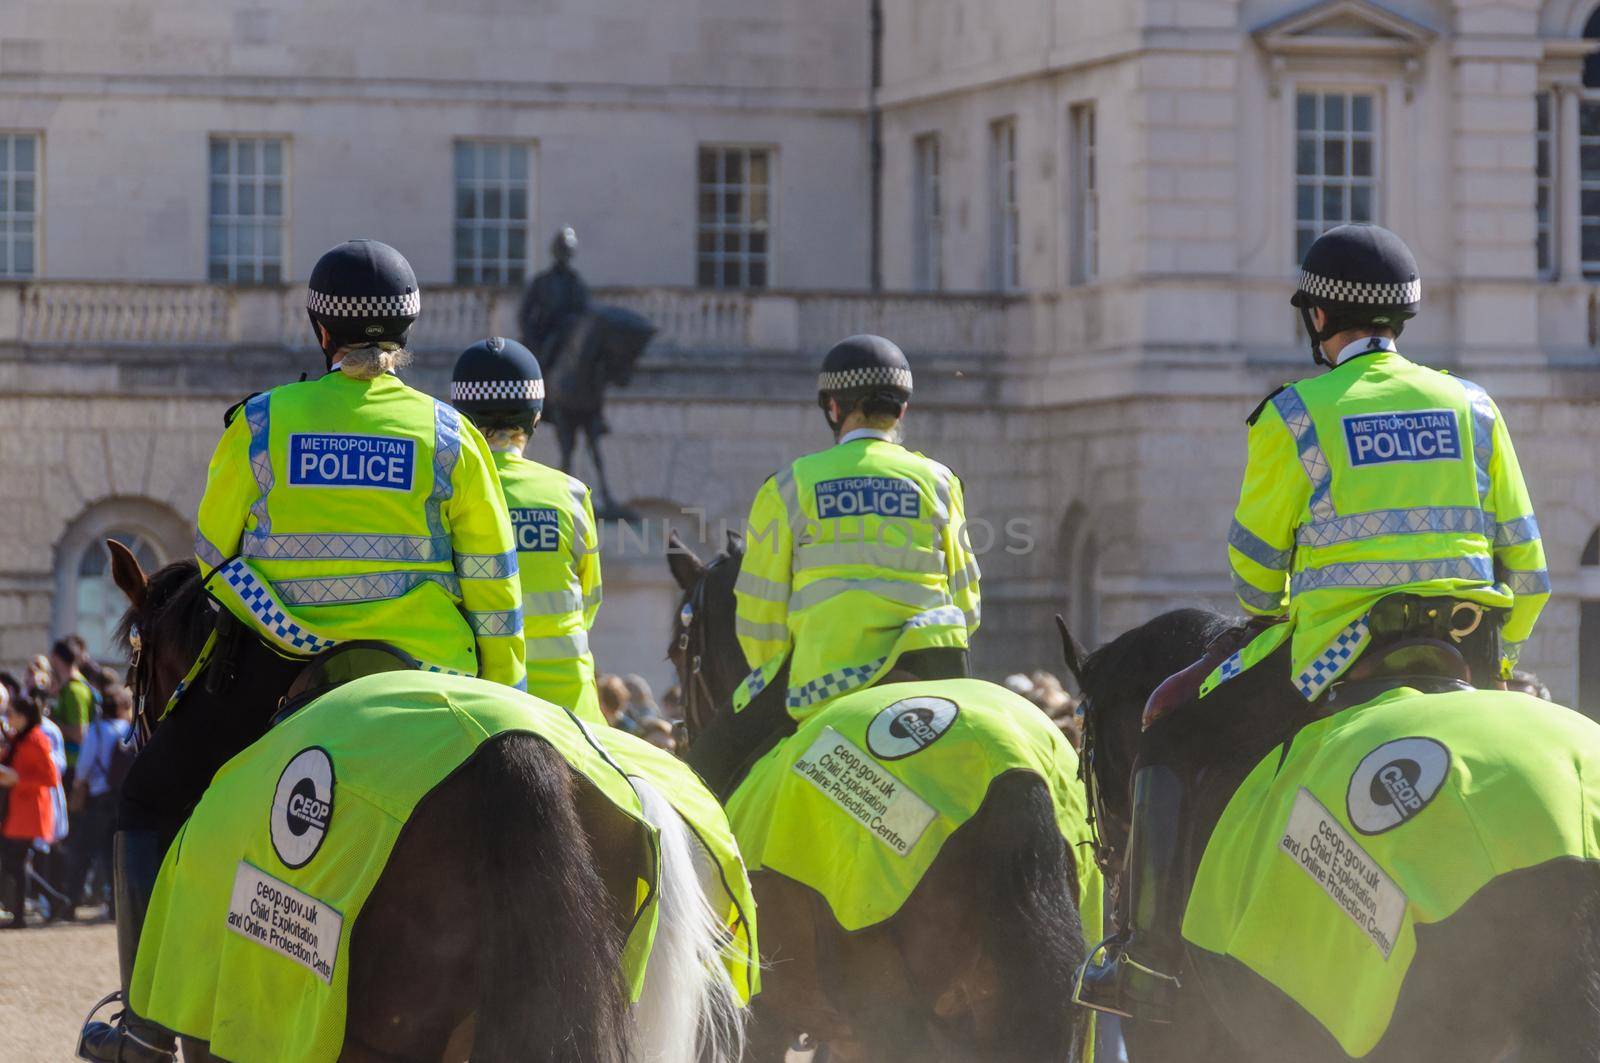 Mounted police officers in London, England, UK by dutourdumonde